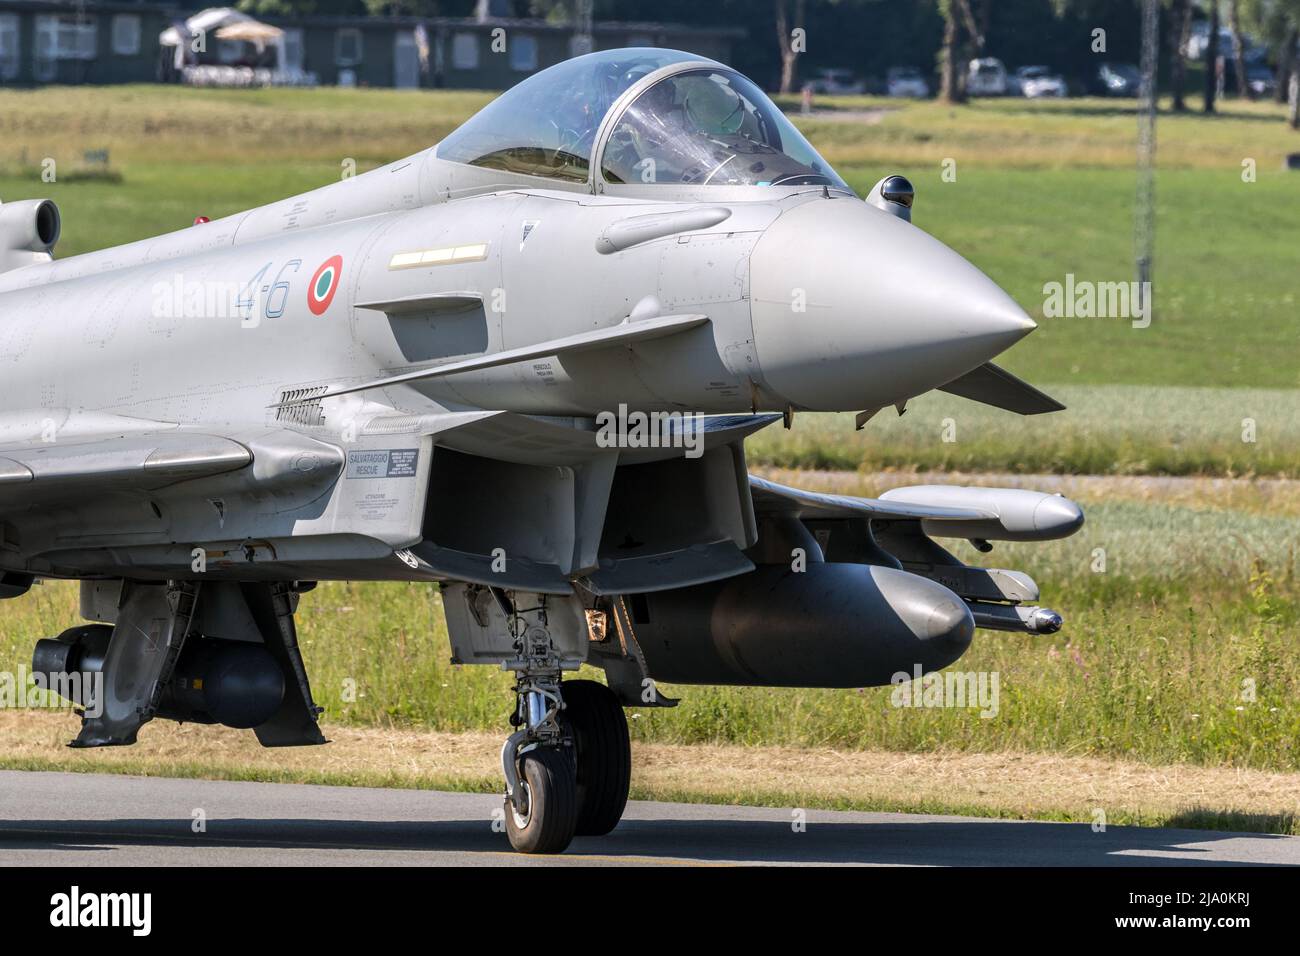 Italian Air Force Eurofighter Typhoon fighter jets taxiing to the runway at Florennes Air Base, Belgium - June 15, 2017 Stock Photo